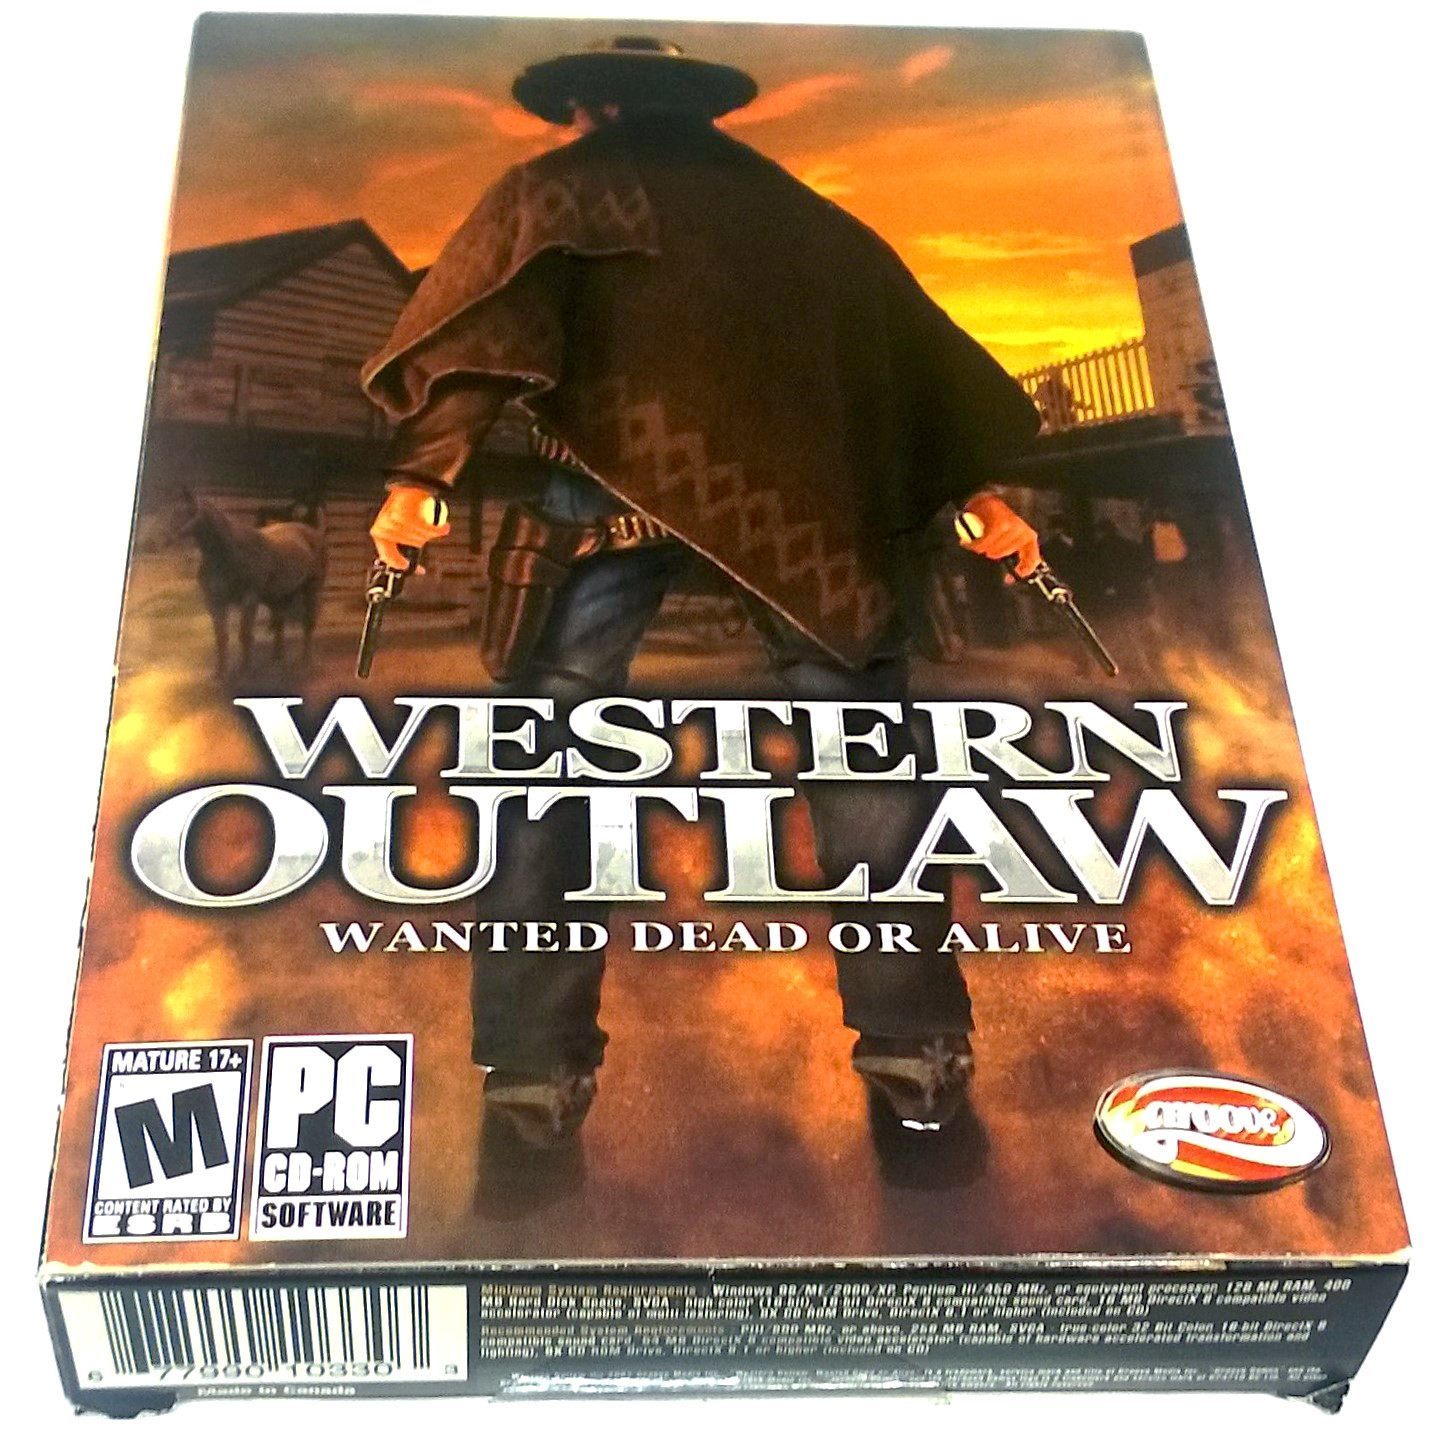 Western Outlaw: Wanted Dead or Alive for PC CD-ROM - Front of box